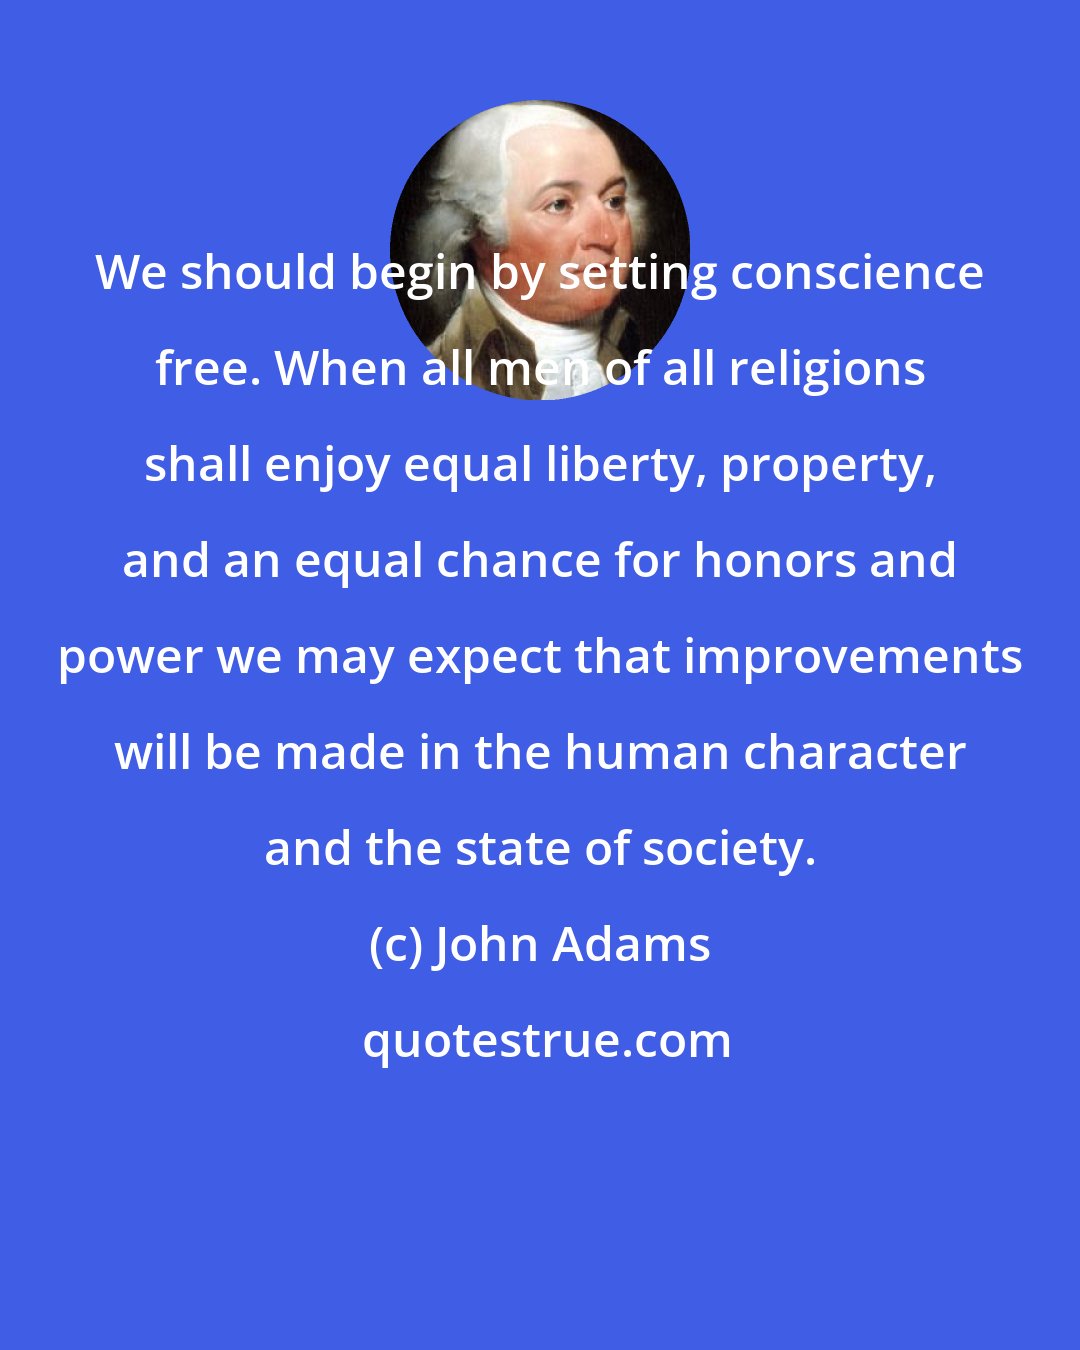 John Adams: We should begin by setting conscience free. When all men of all religions shall enjoy equal liberty, property, and an equal chance for honors and power we may expect that improvements will be made in the human character and the state of society.